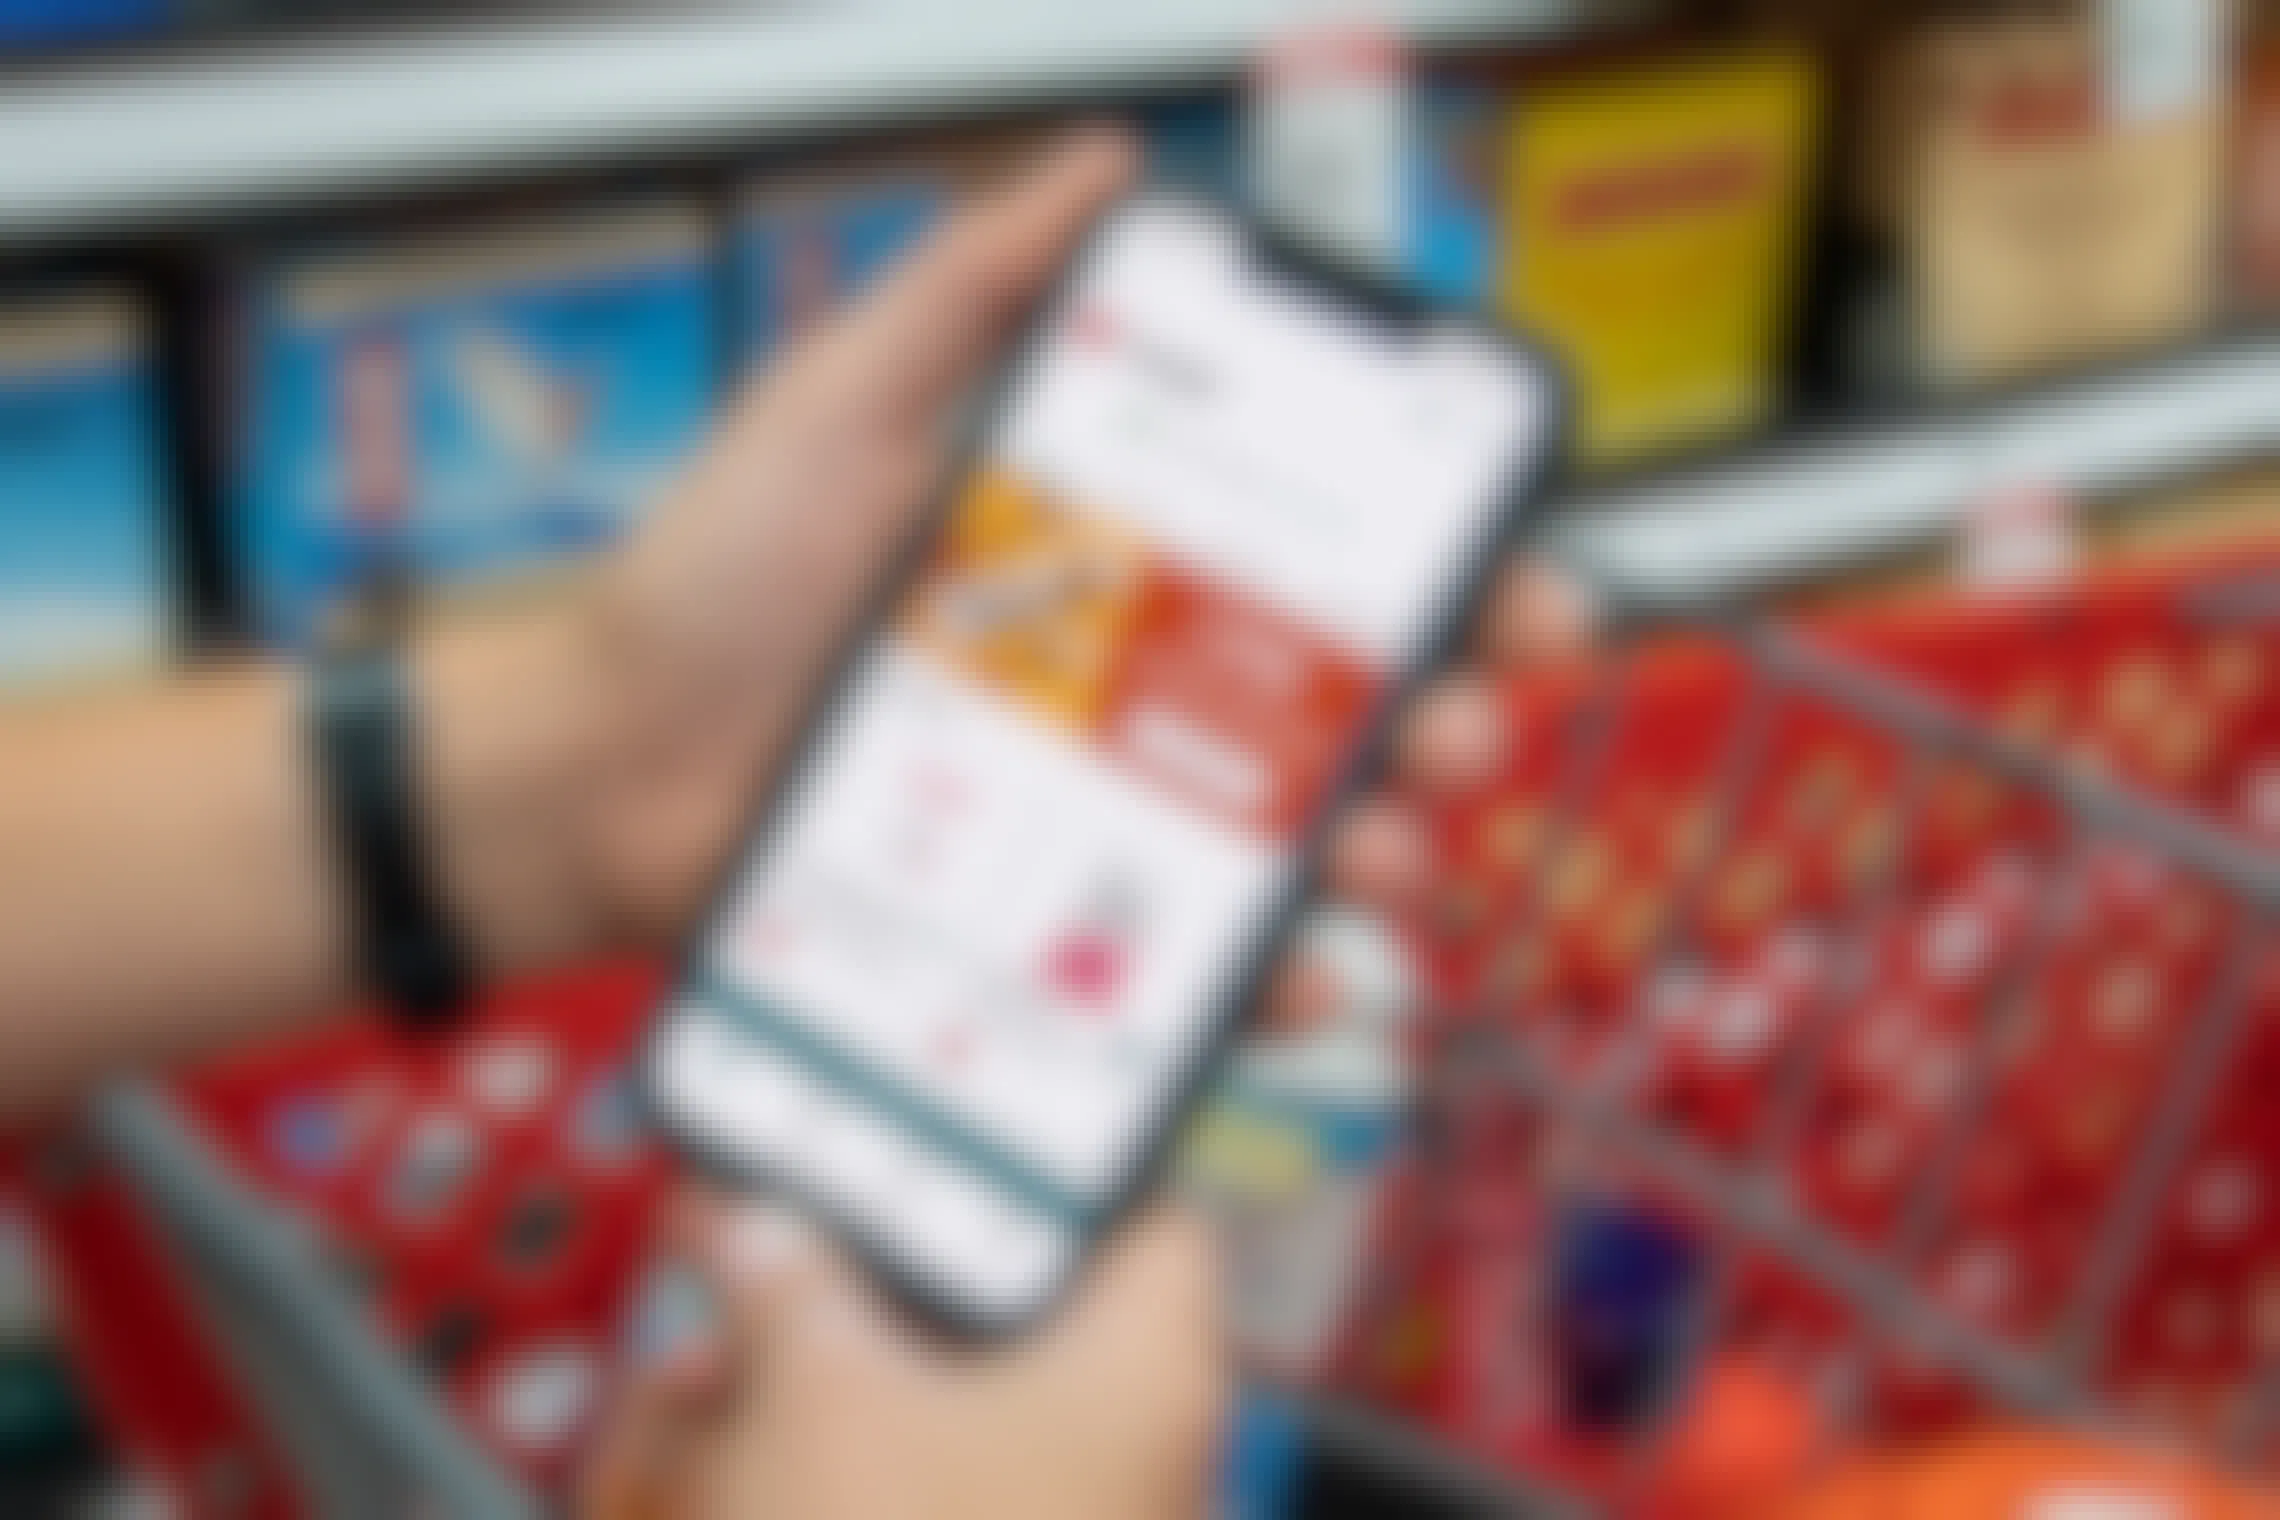 A person's hands resting on a Target shopping cart handle holding an iPhone that is displaying the Ibotta mobile app offers for Target.